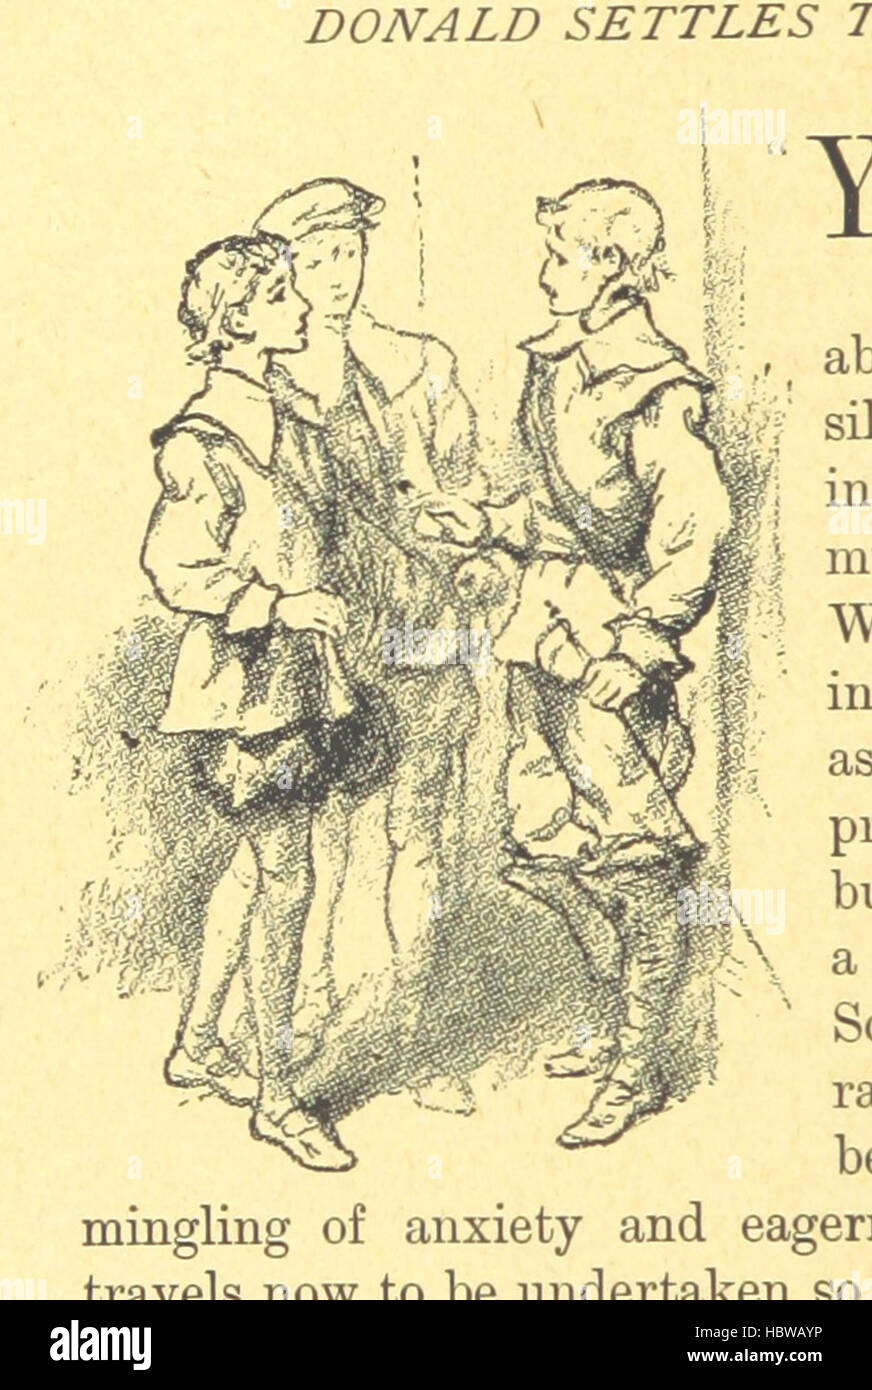 Image taken from page 74 of 'Never Give In. A tale of the life and times of Gustavus Adolphus' Image taken from page 74 of 'Never Give In A Stock Photo